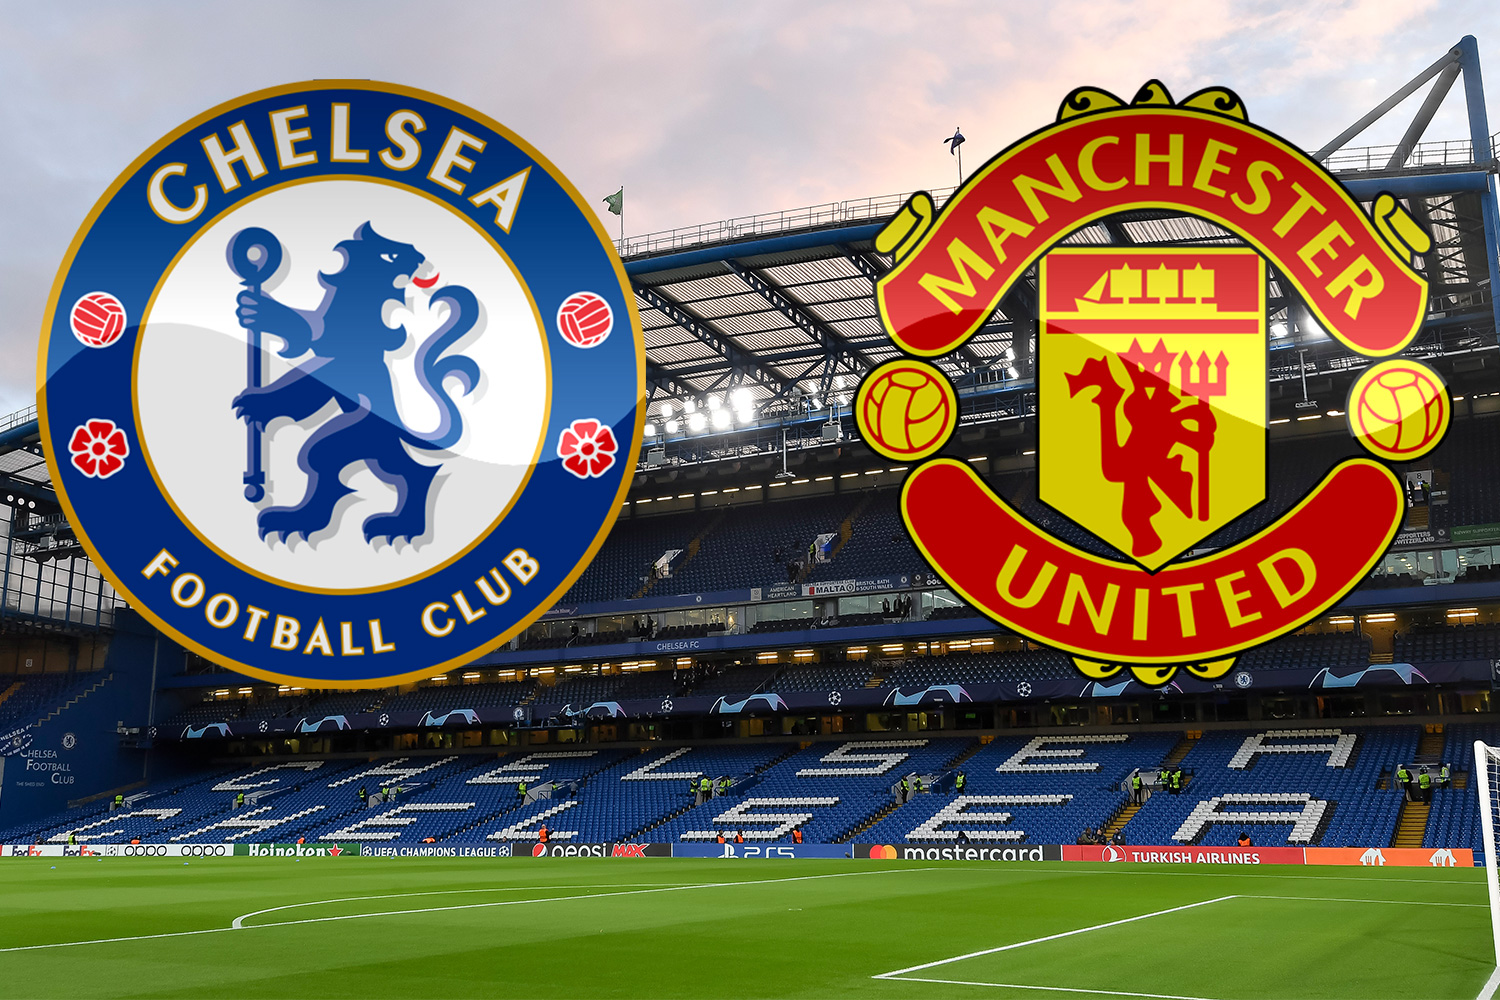 Manchester United vs Chelsea preview, team news, tickets & prediction